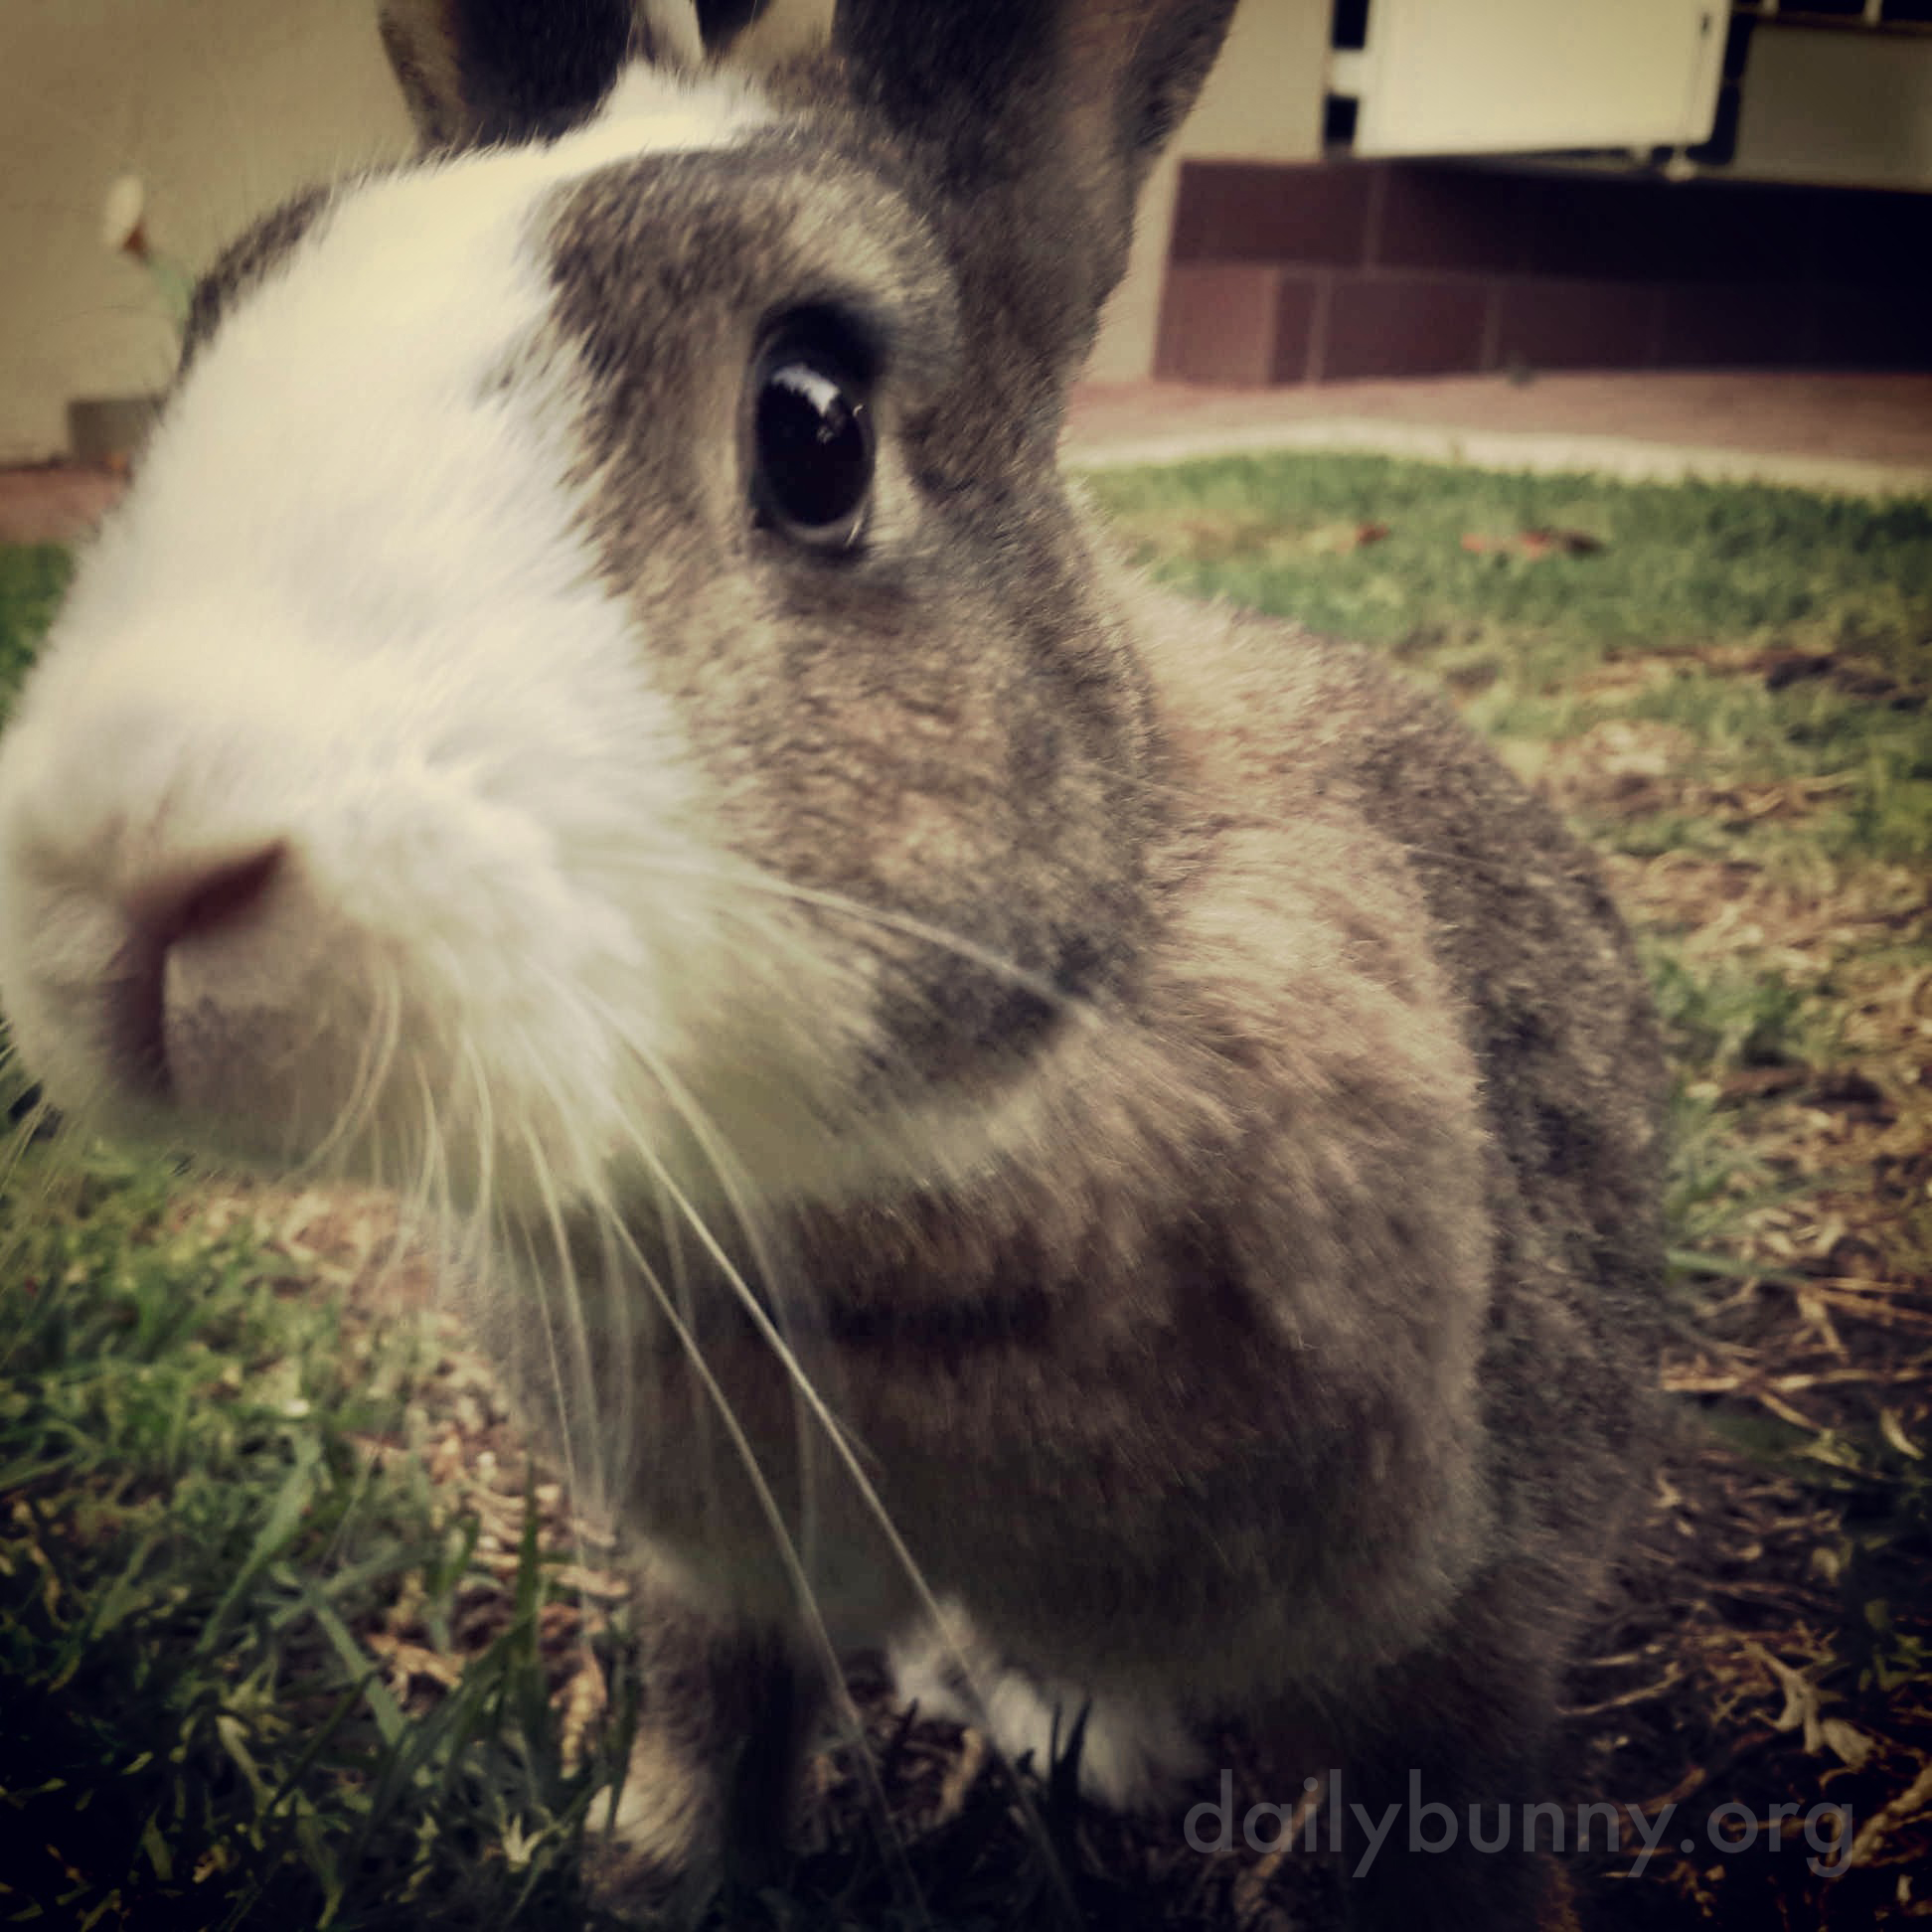 Bunny Seems More Interested in the Camera Than in the Yard